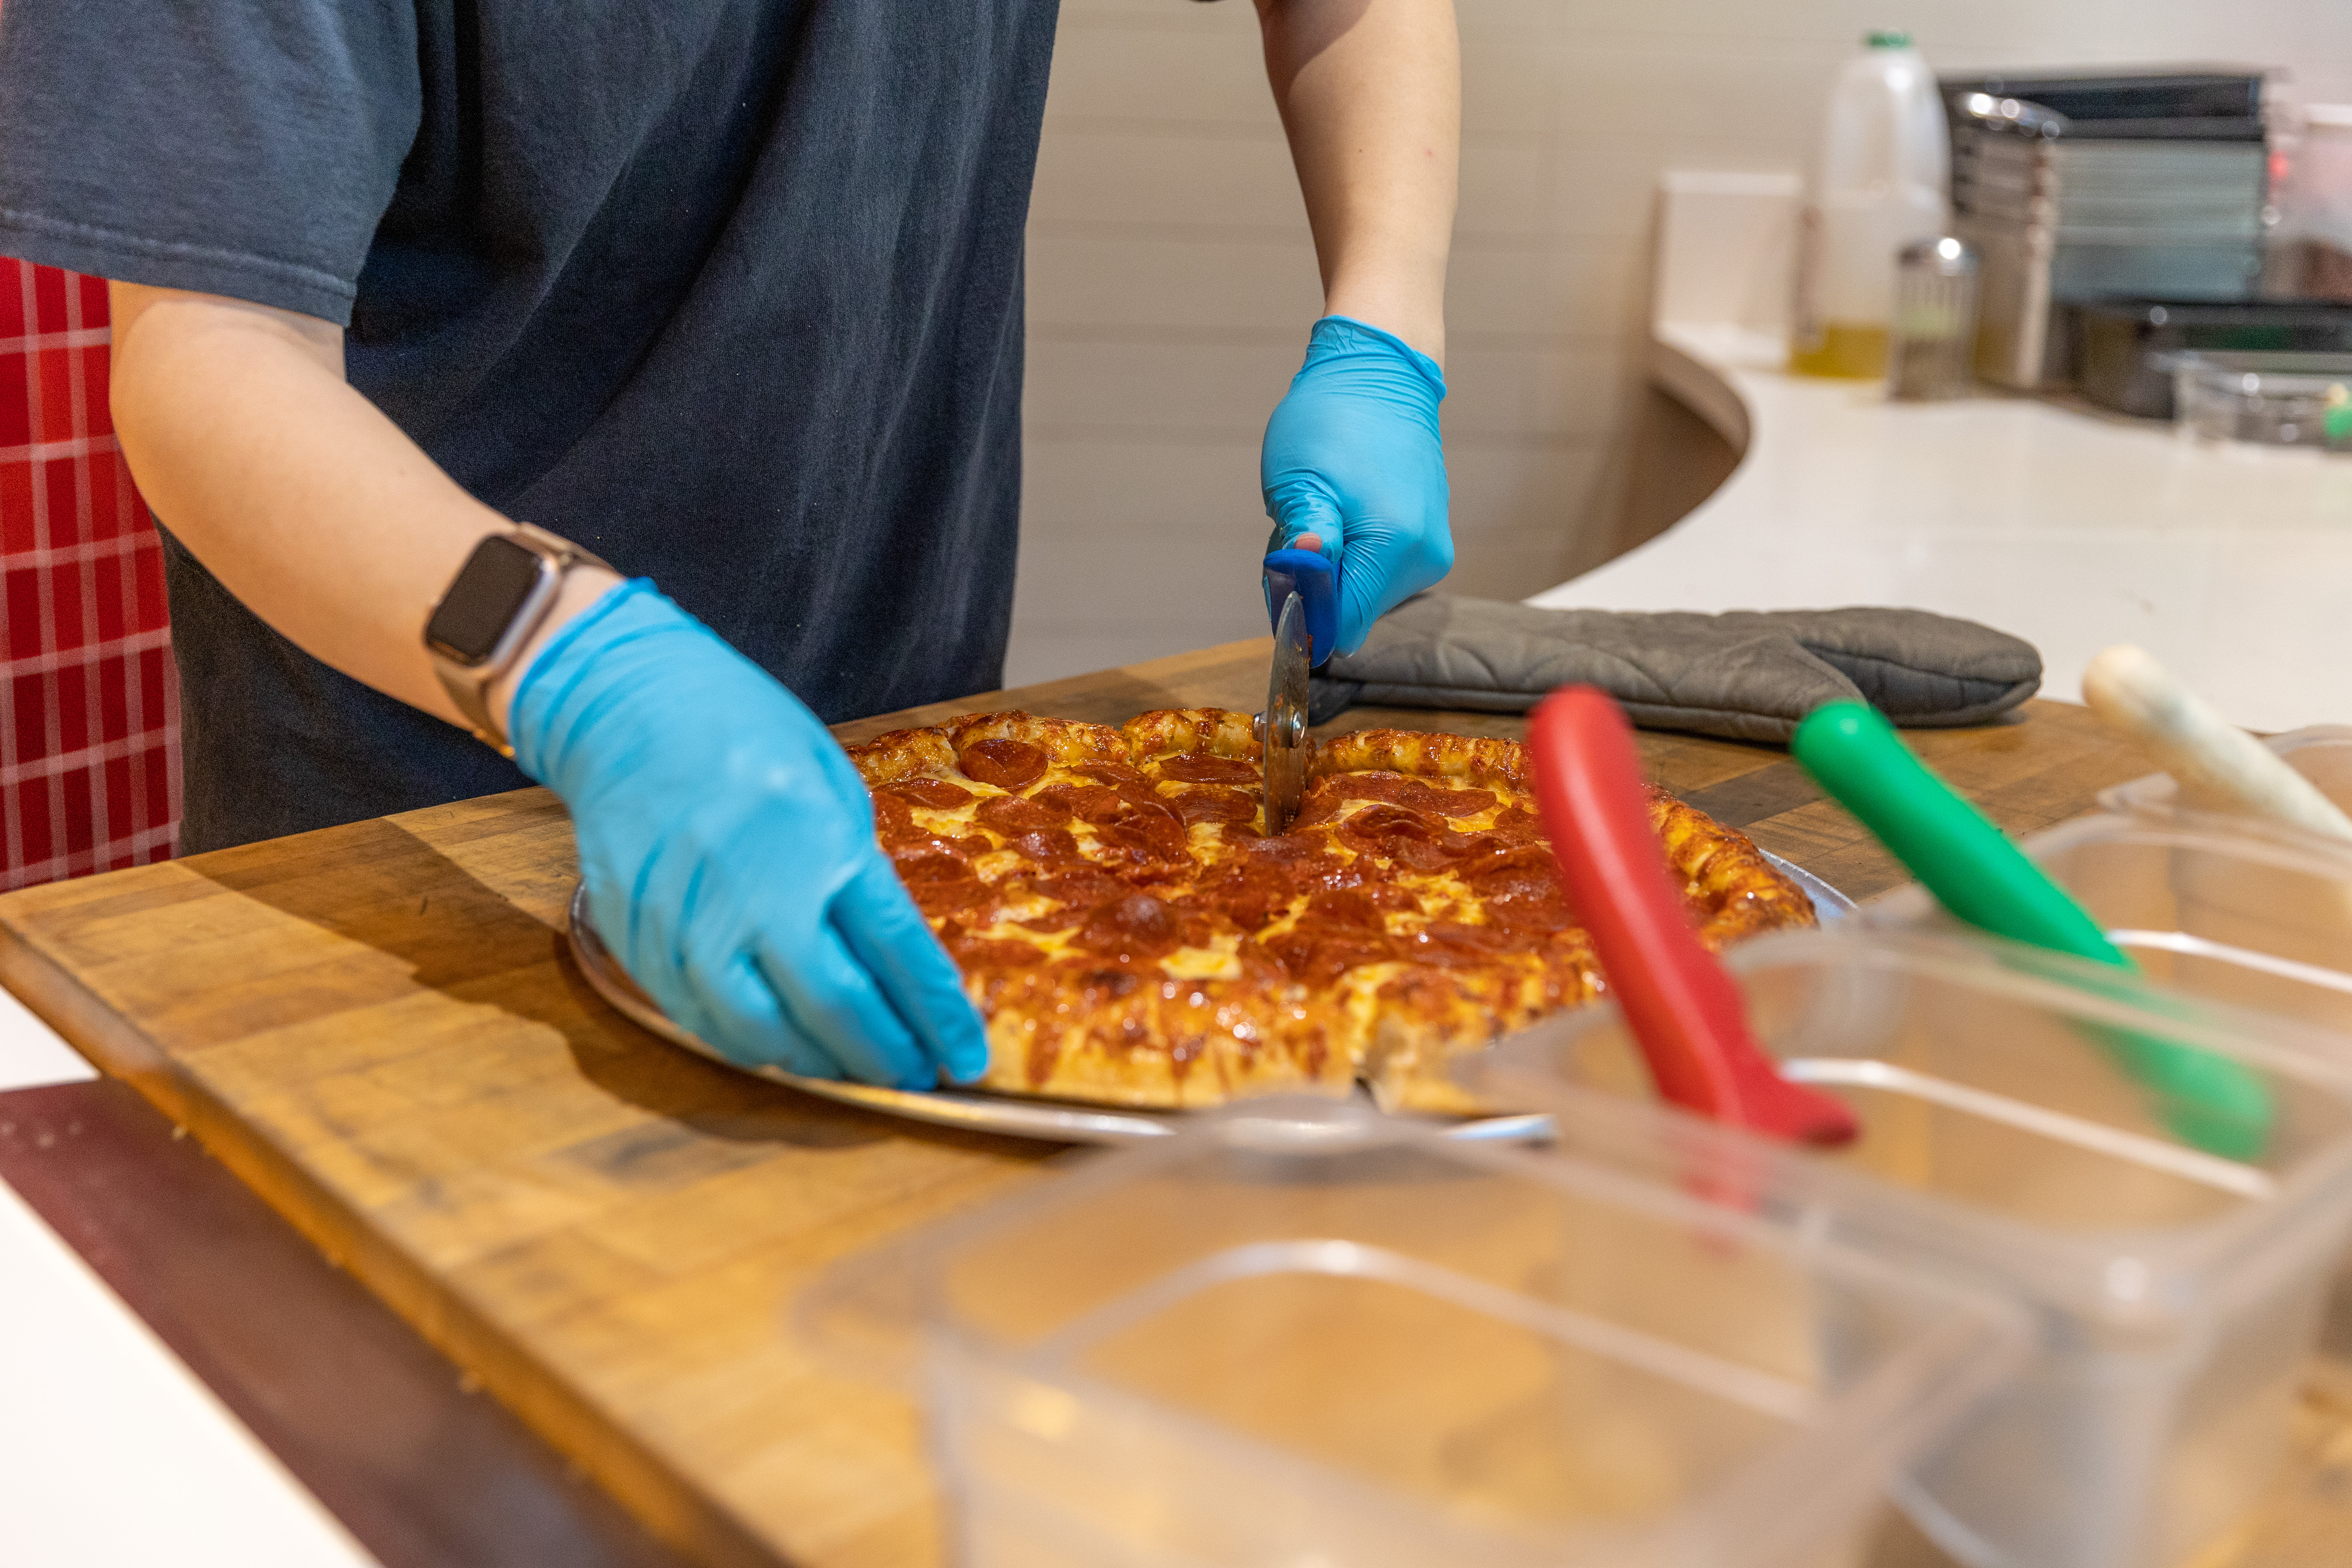 Hands in gloves cutting pizza